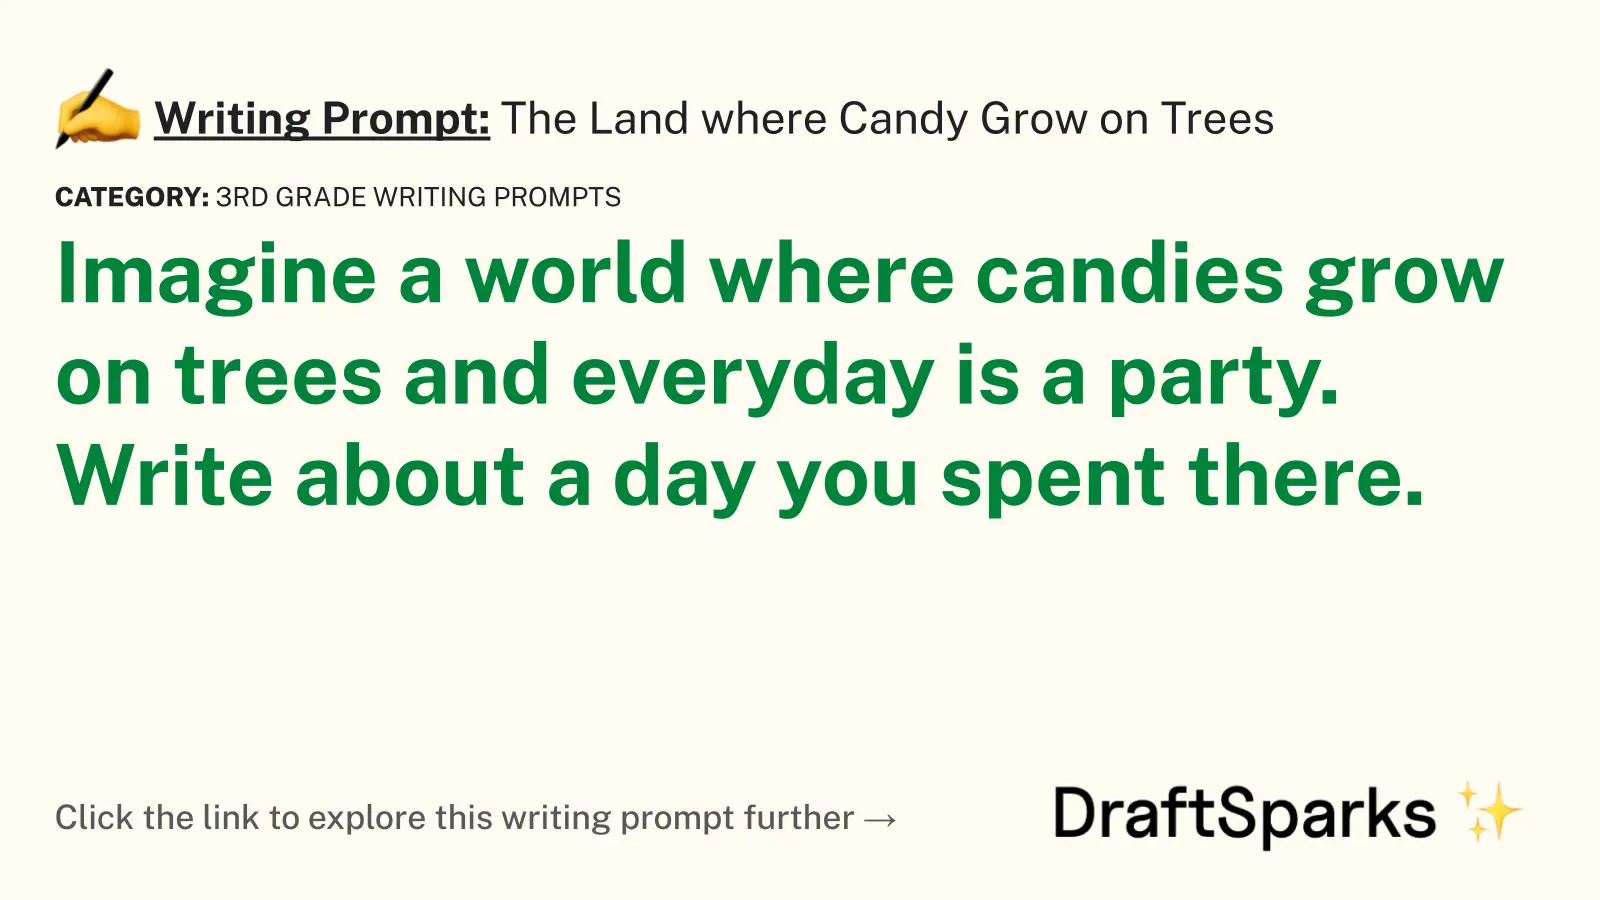 The Land where Candy Grow on Trees